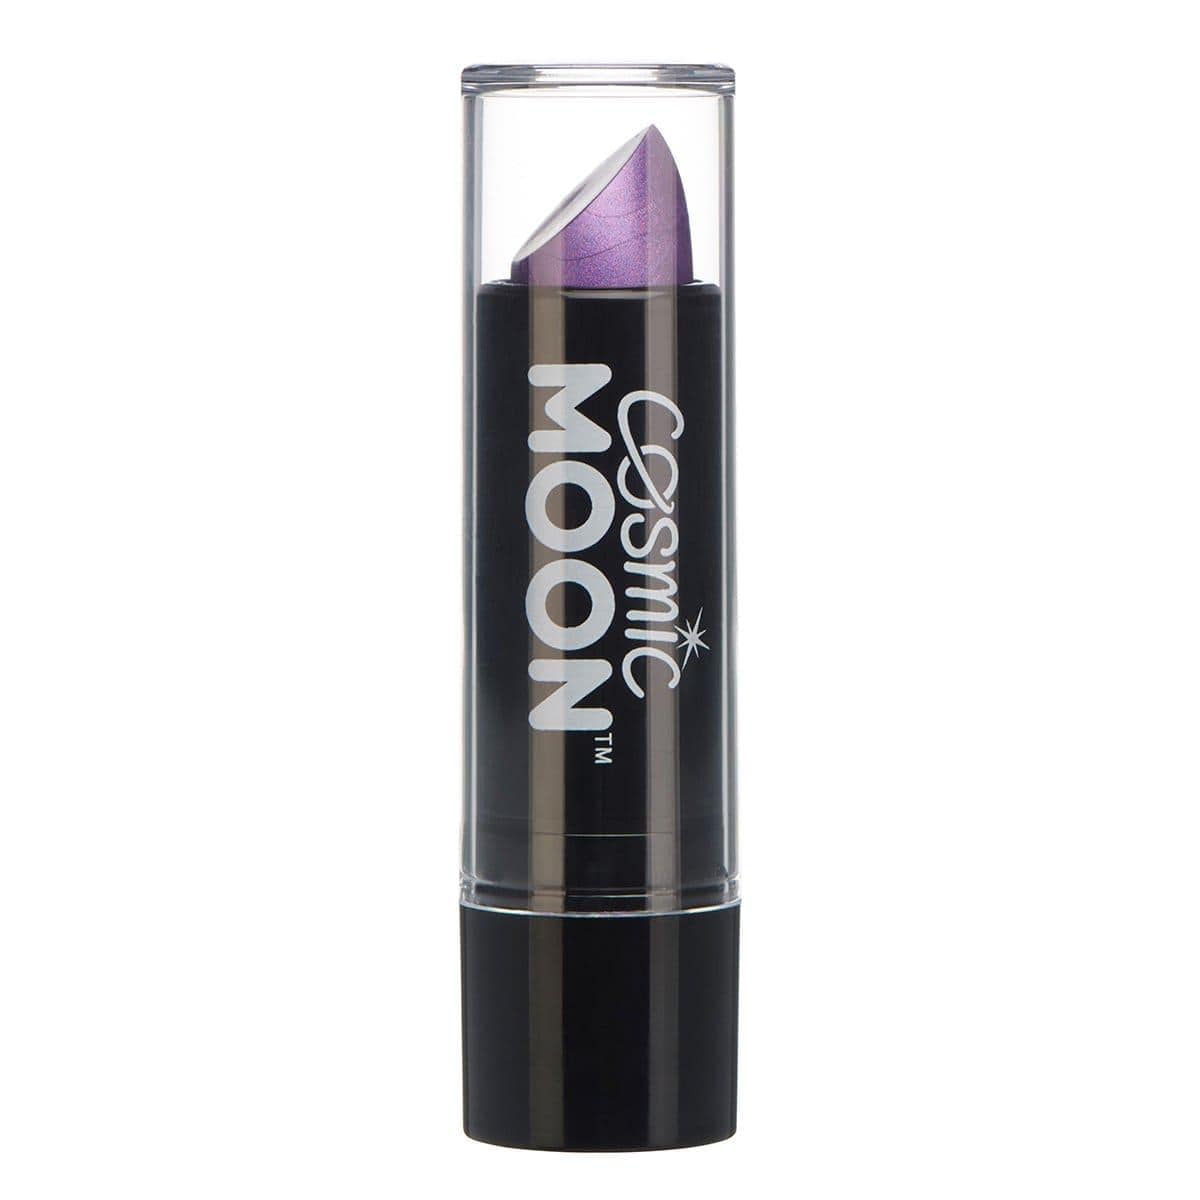 Buy Costume Accessories Moon purple metallic lipstick sold at Party Expert